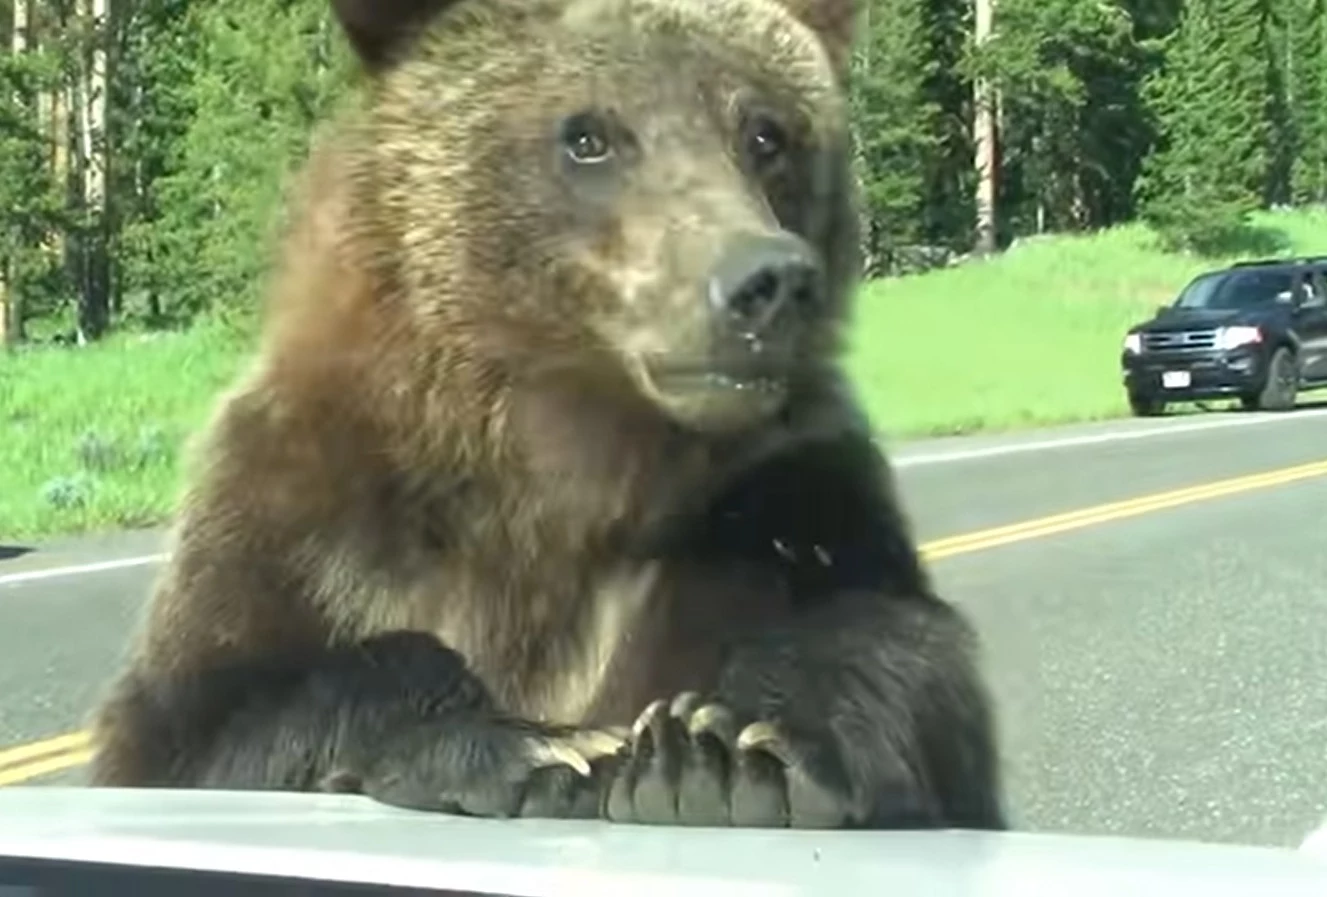 A Family’s Yellowstone Grizzly Experience Is Easily One They’ll Never Forget